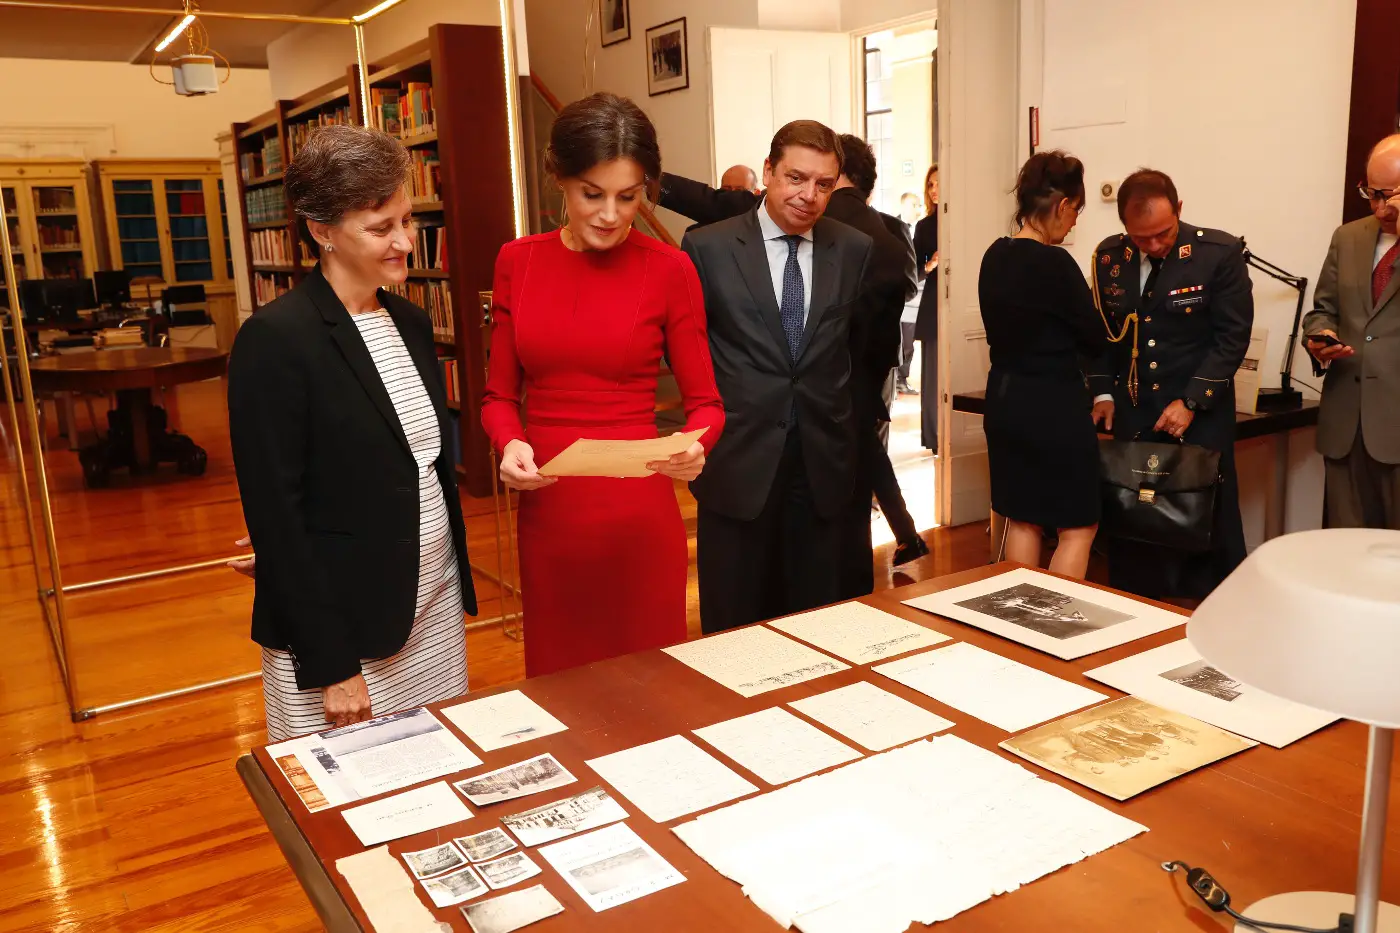 Queen Letizia of Spain visited Royal Academy of Spain in Rome